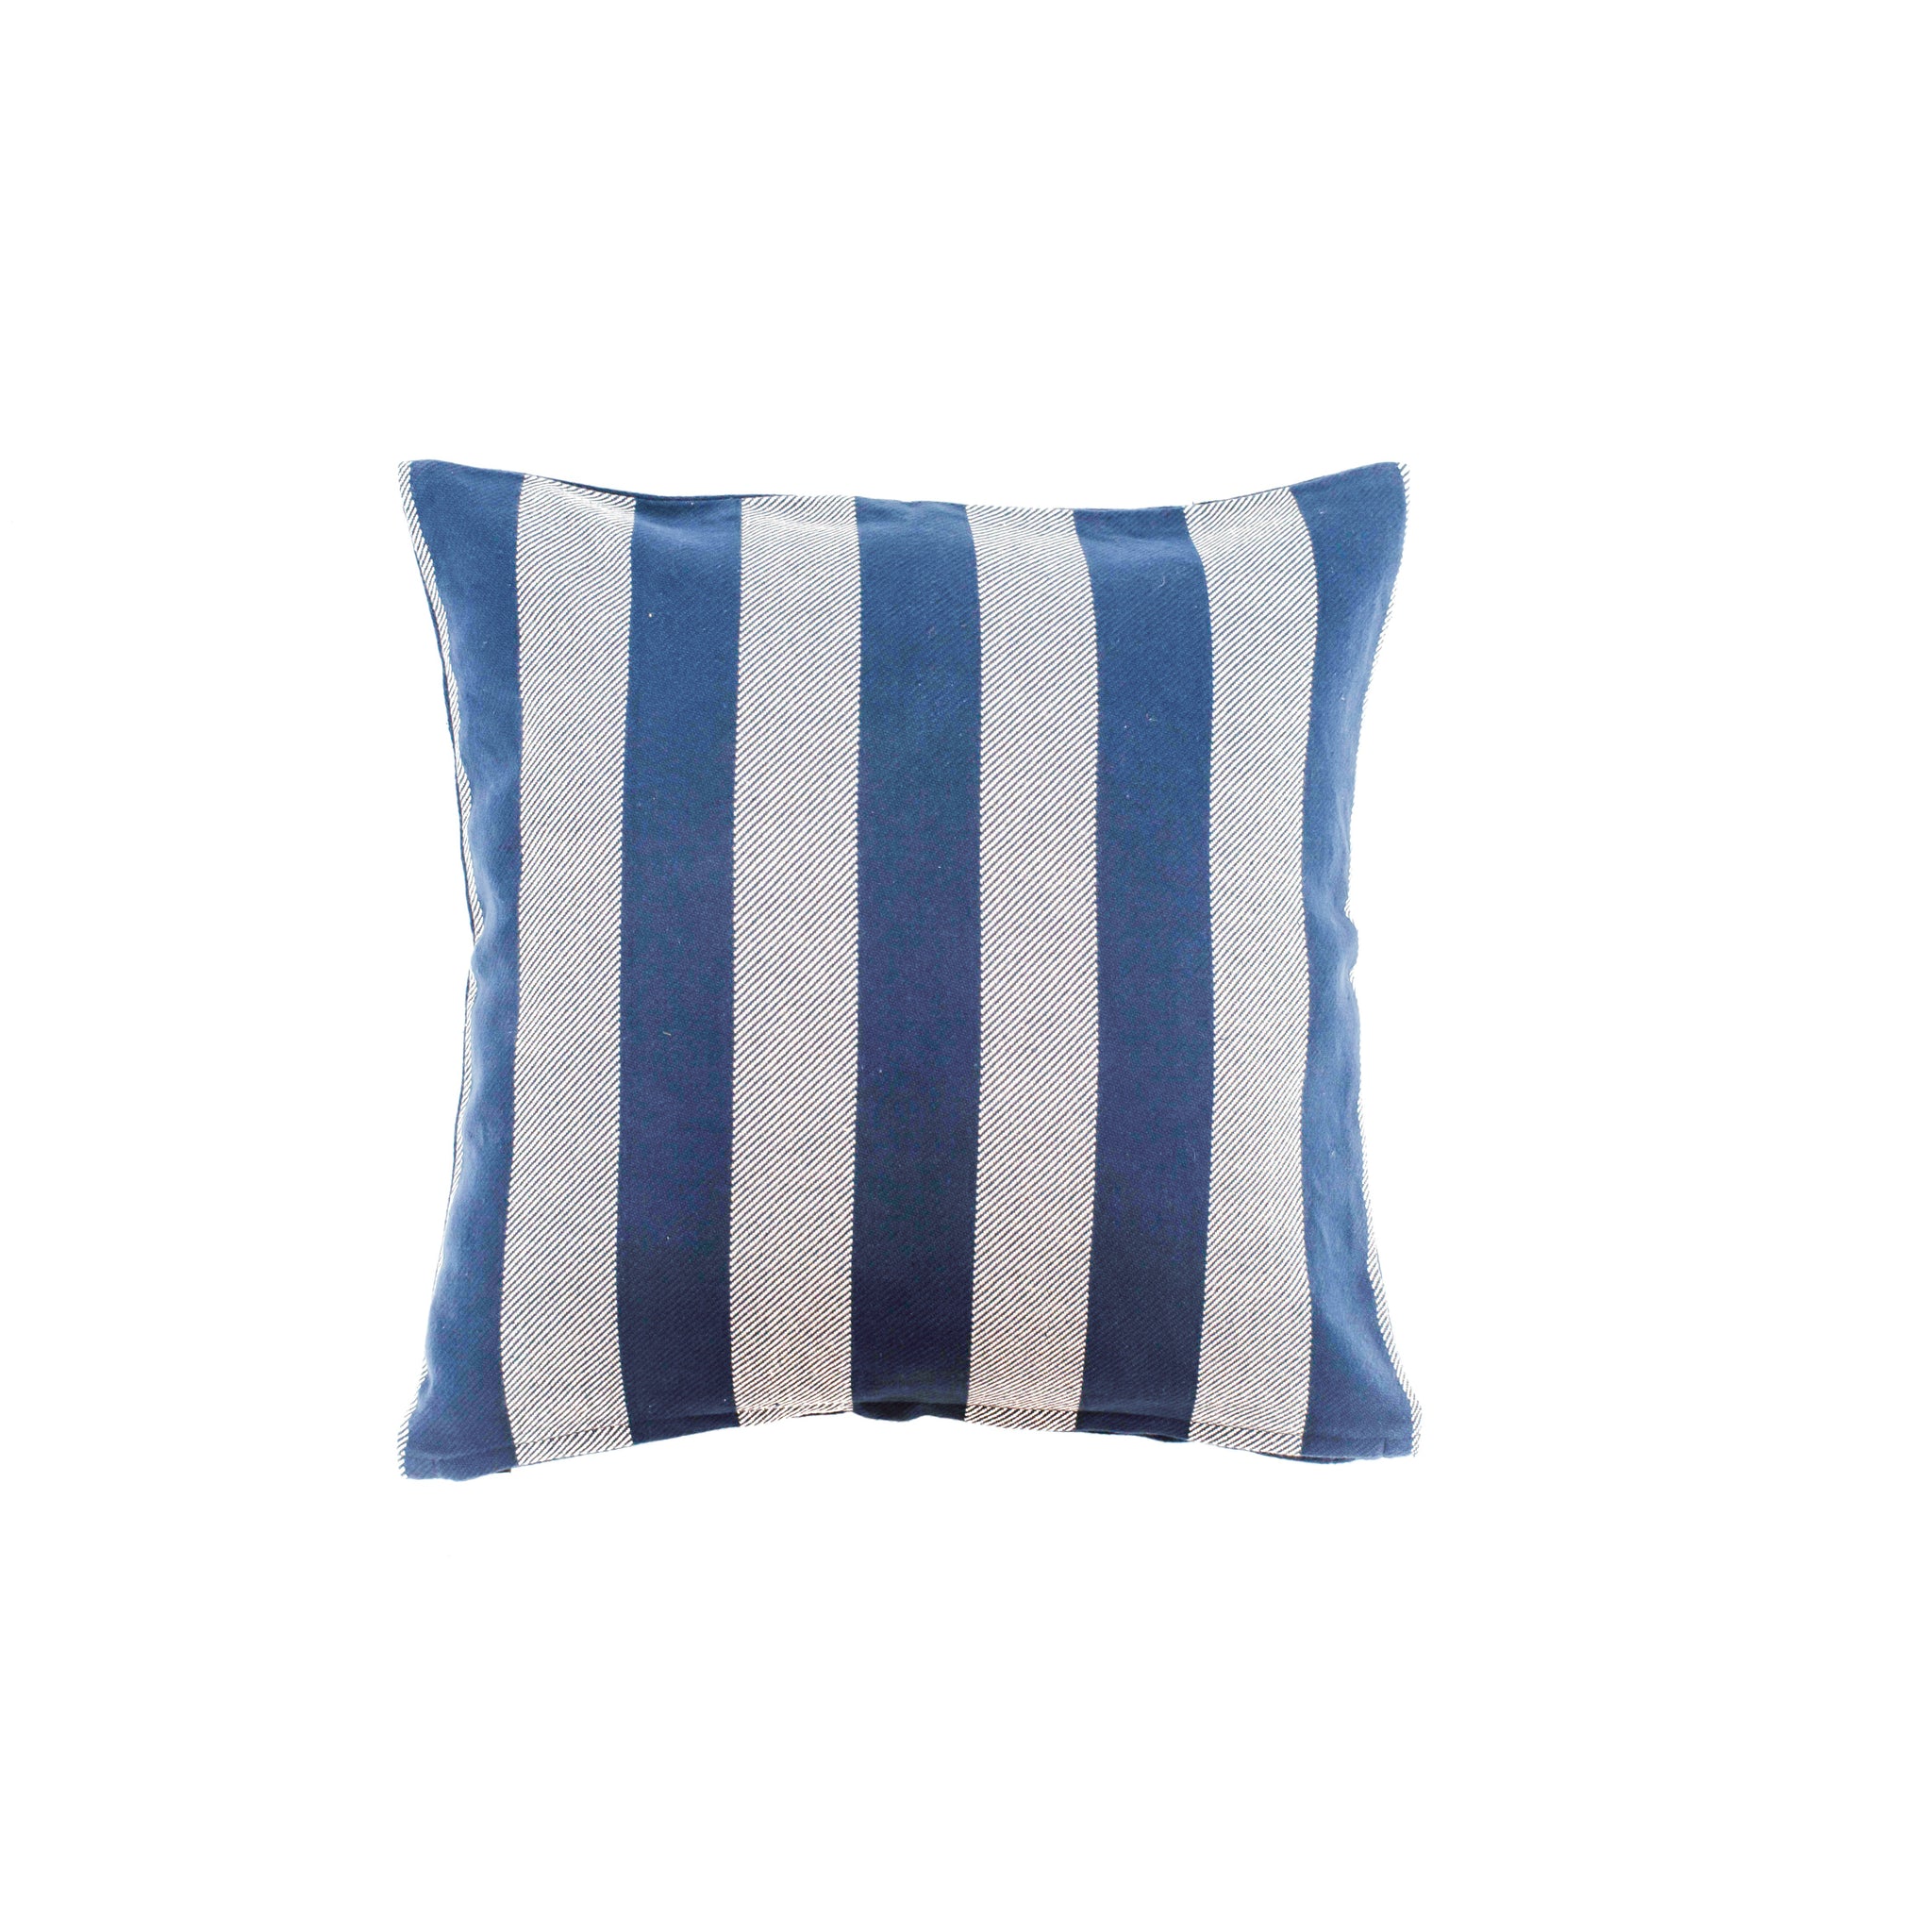 Blue and White Woven Cushion Cover